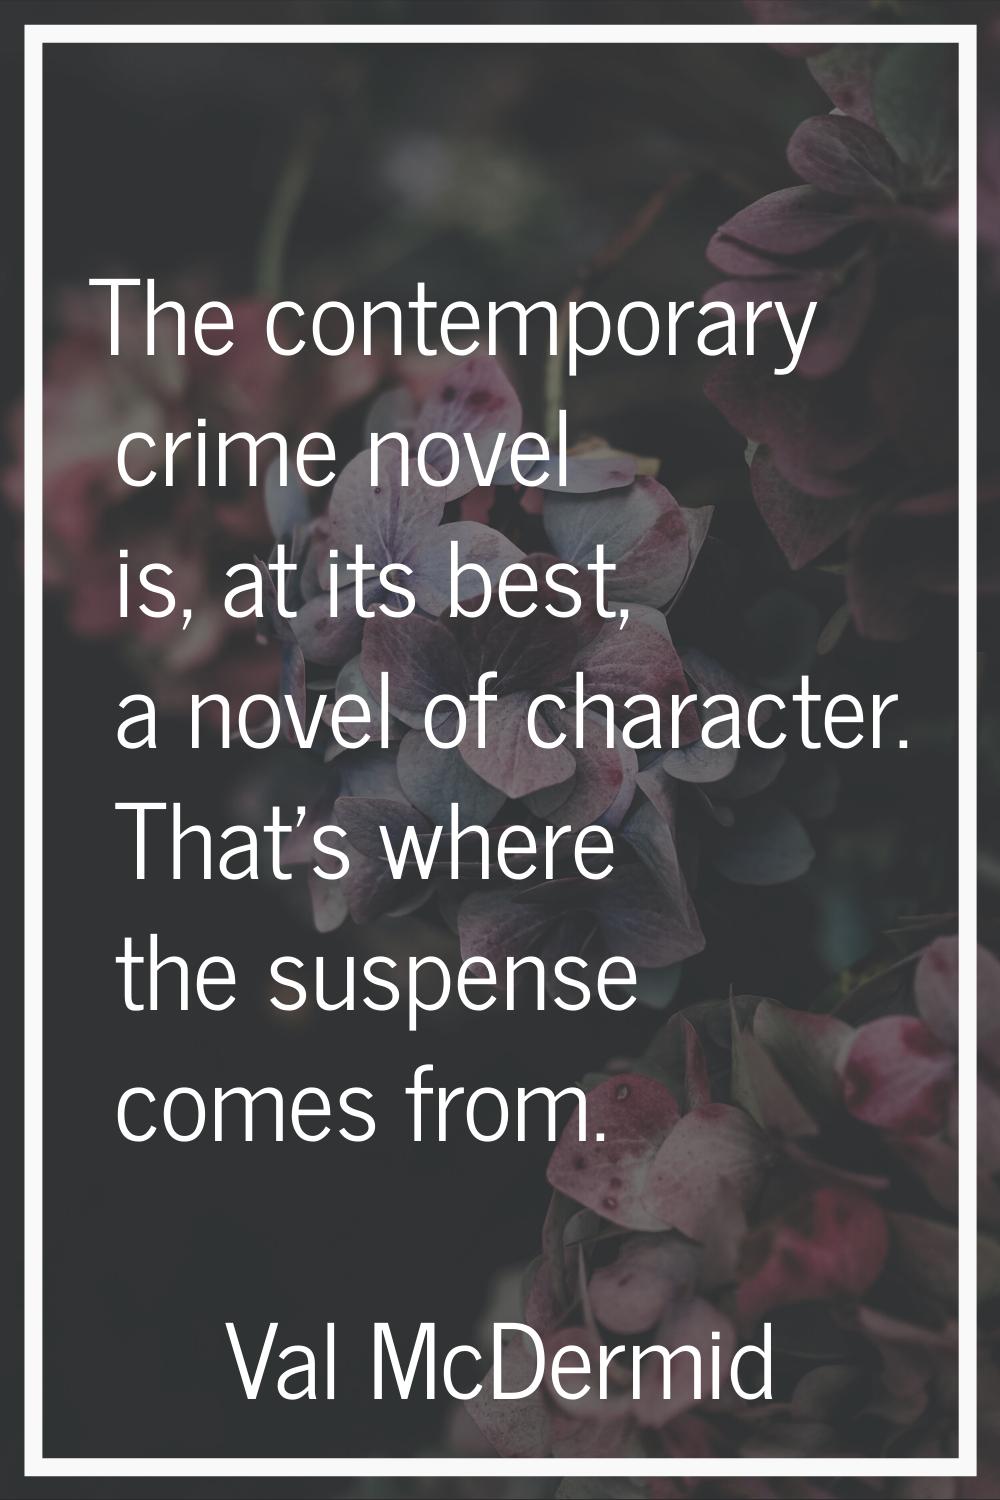 The contemporary crime novel is, at its best, a novel of character. That's where the suspense comes